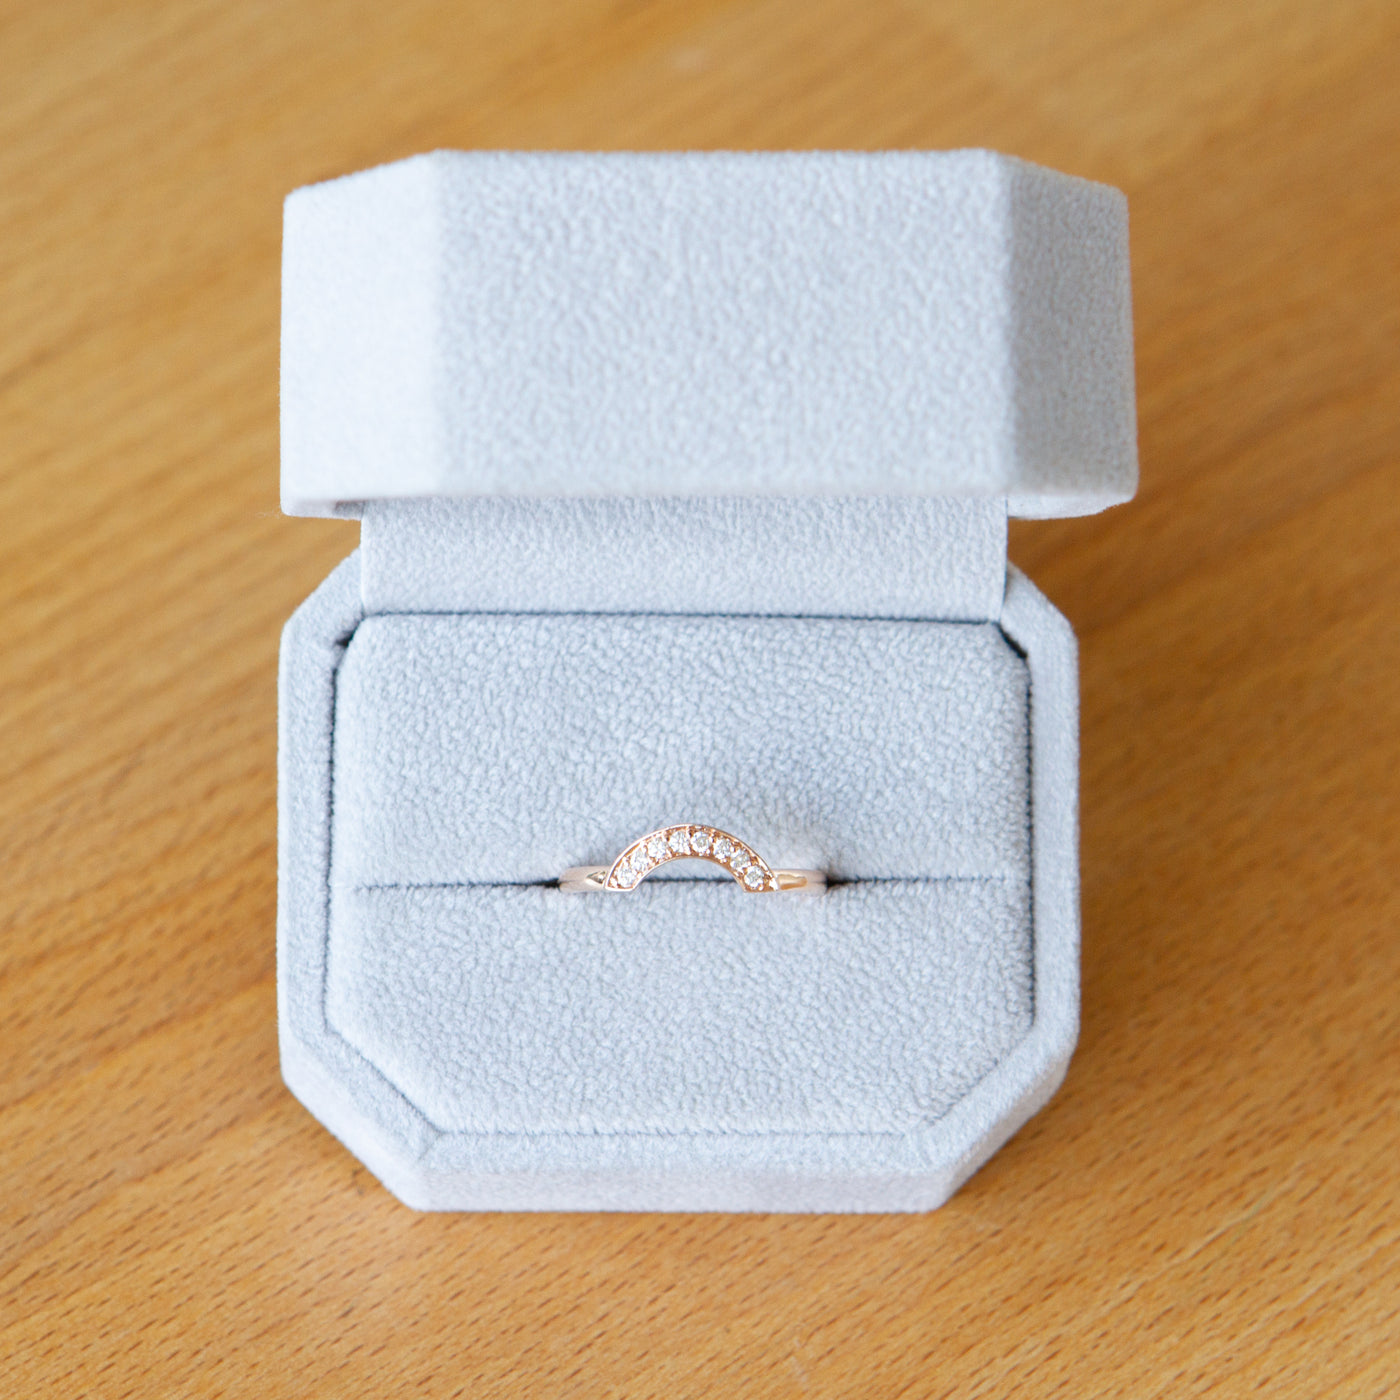 14k rose gold medium pave arch band with white diamonds in 14k rose gold in a ring box